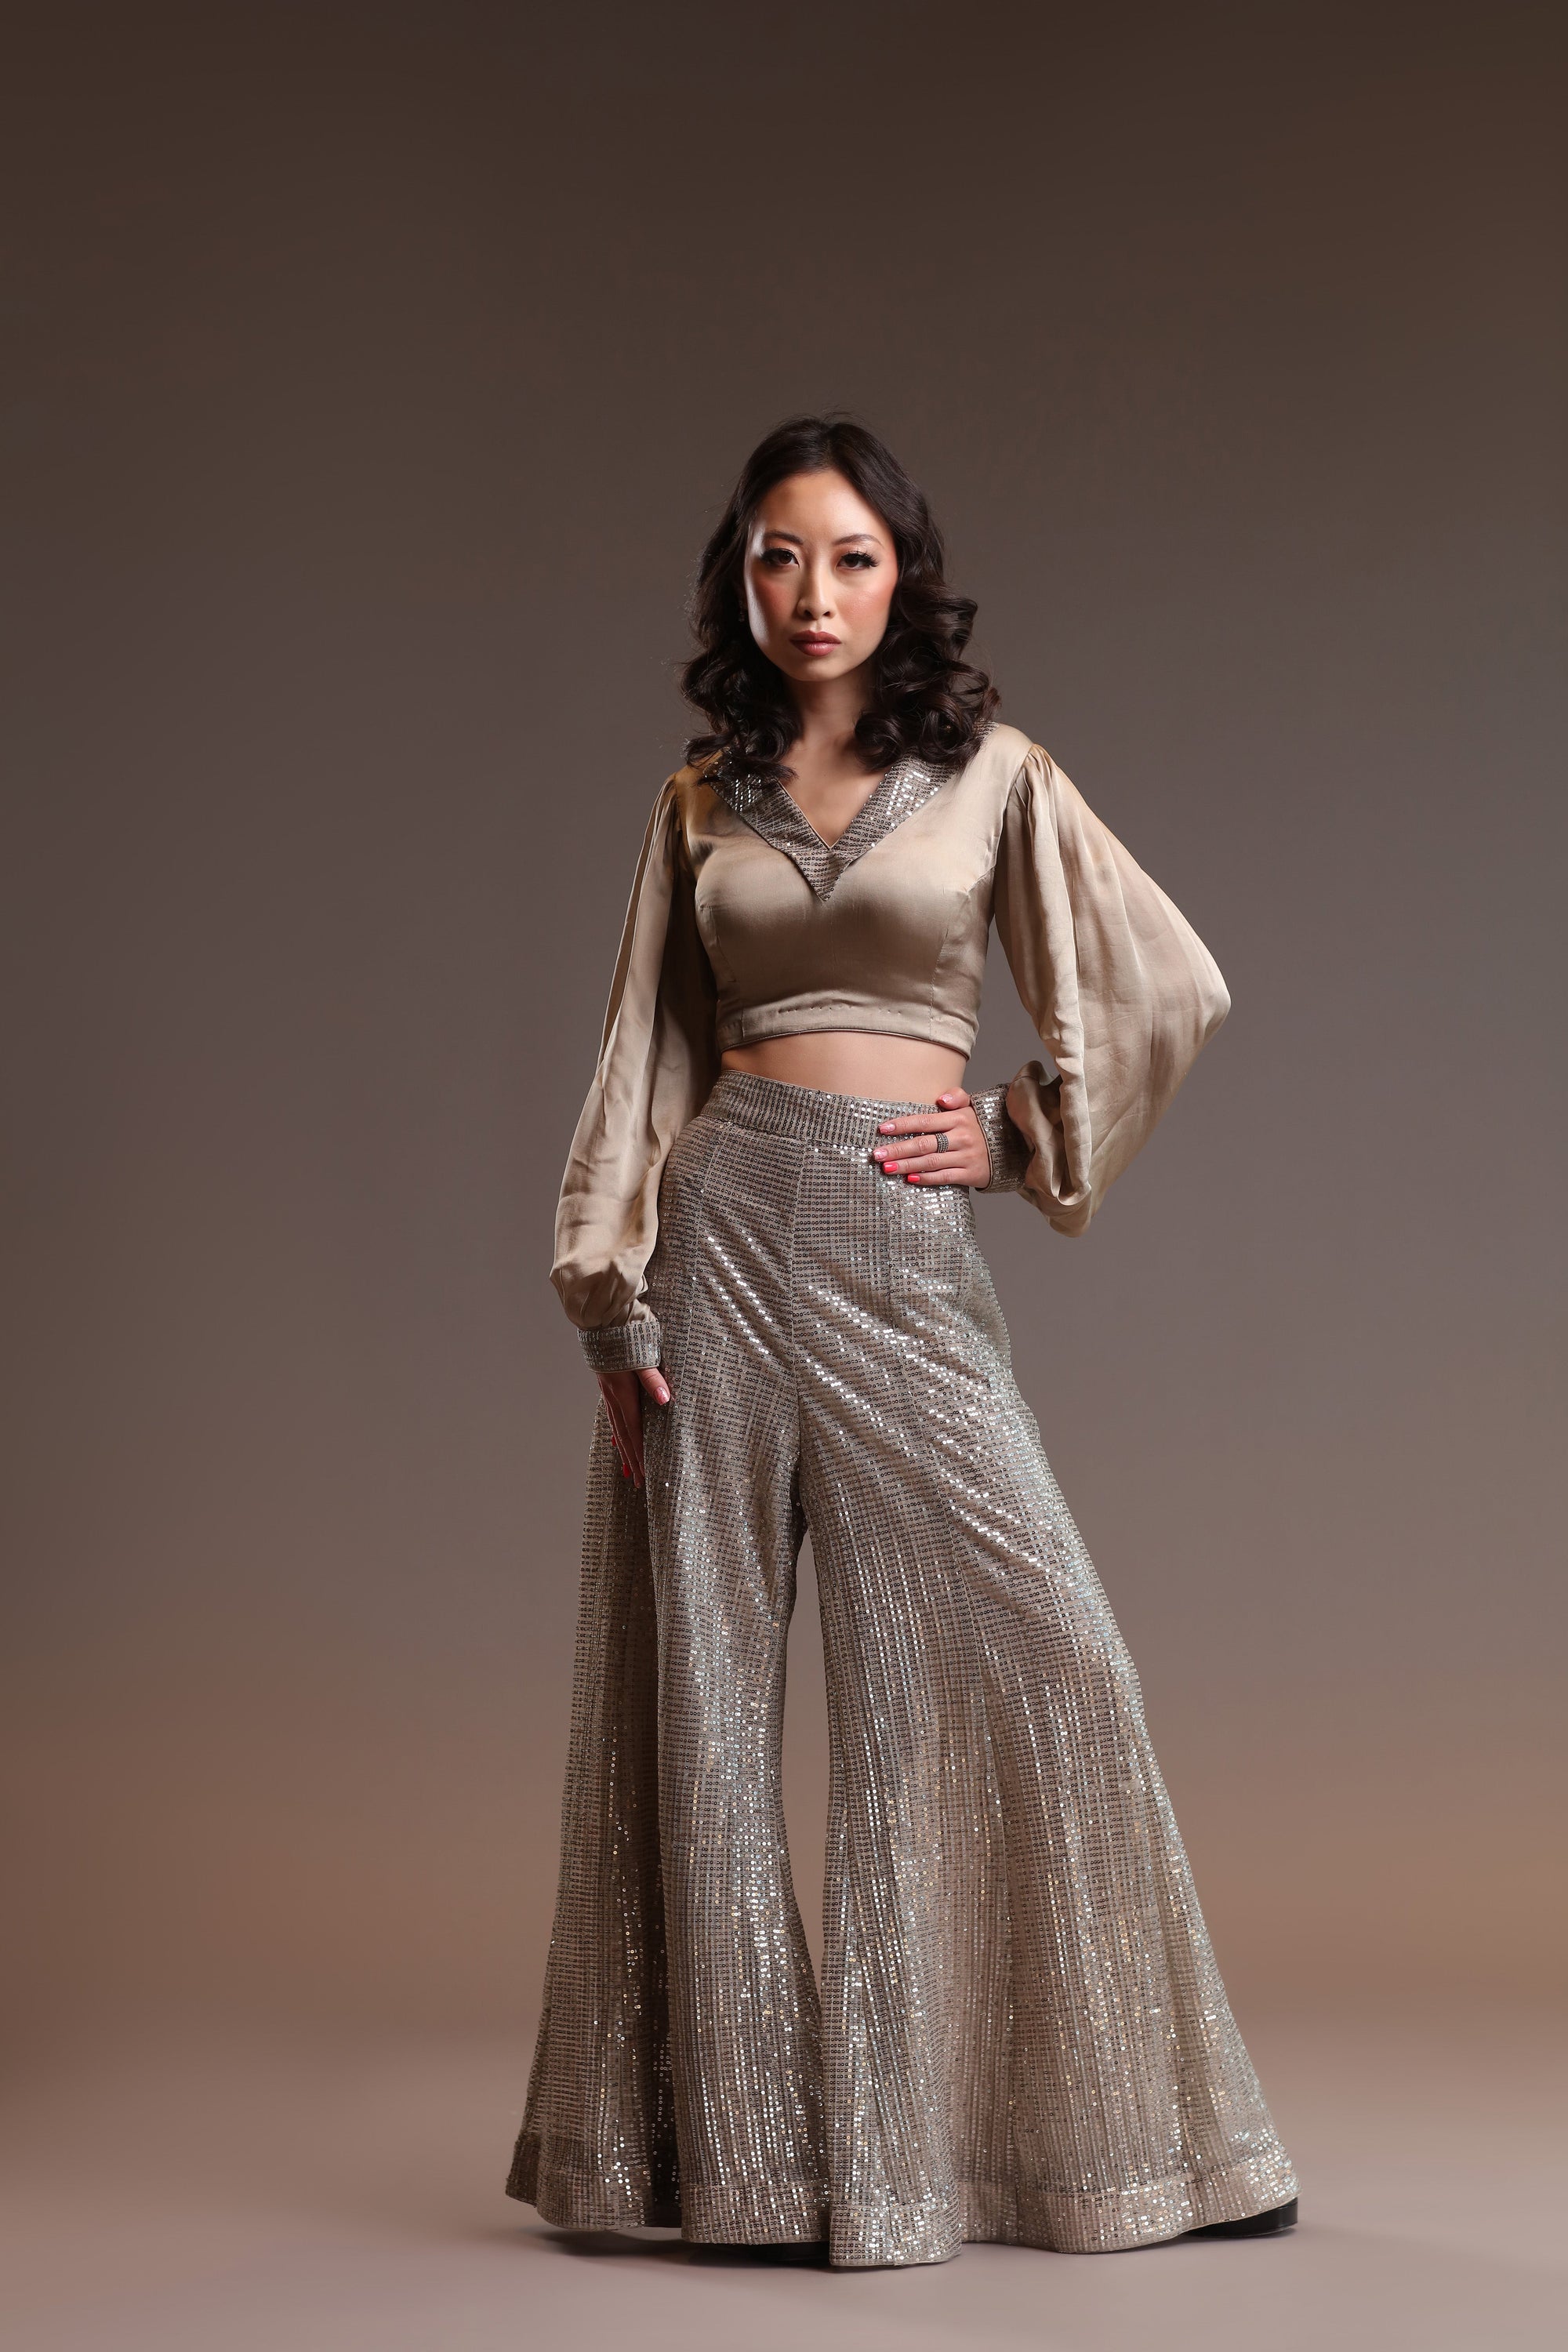 Shimmery Palazzo Pants with Crop Top